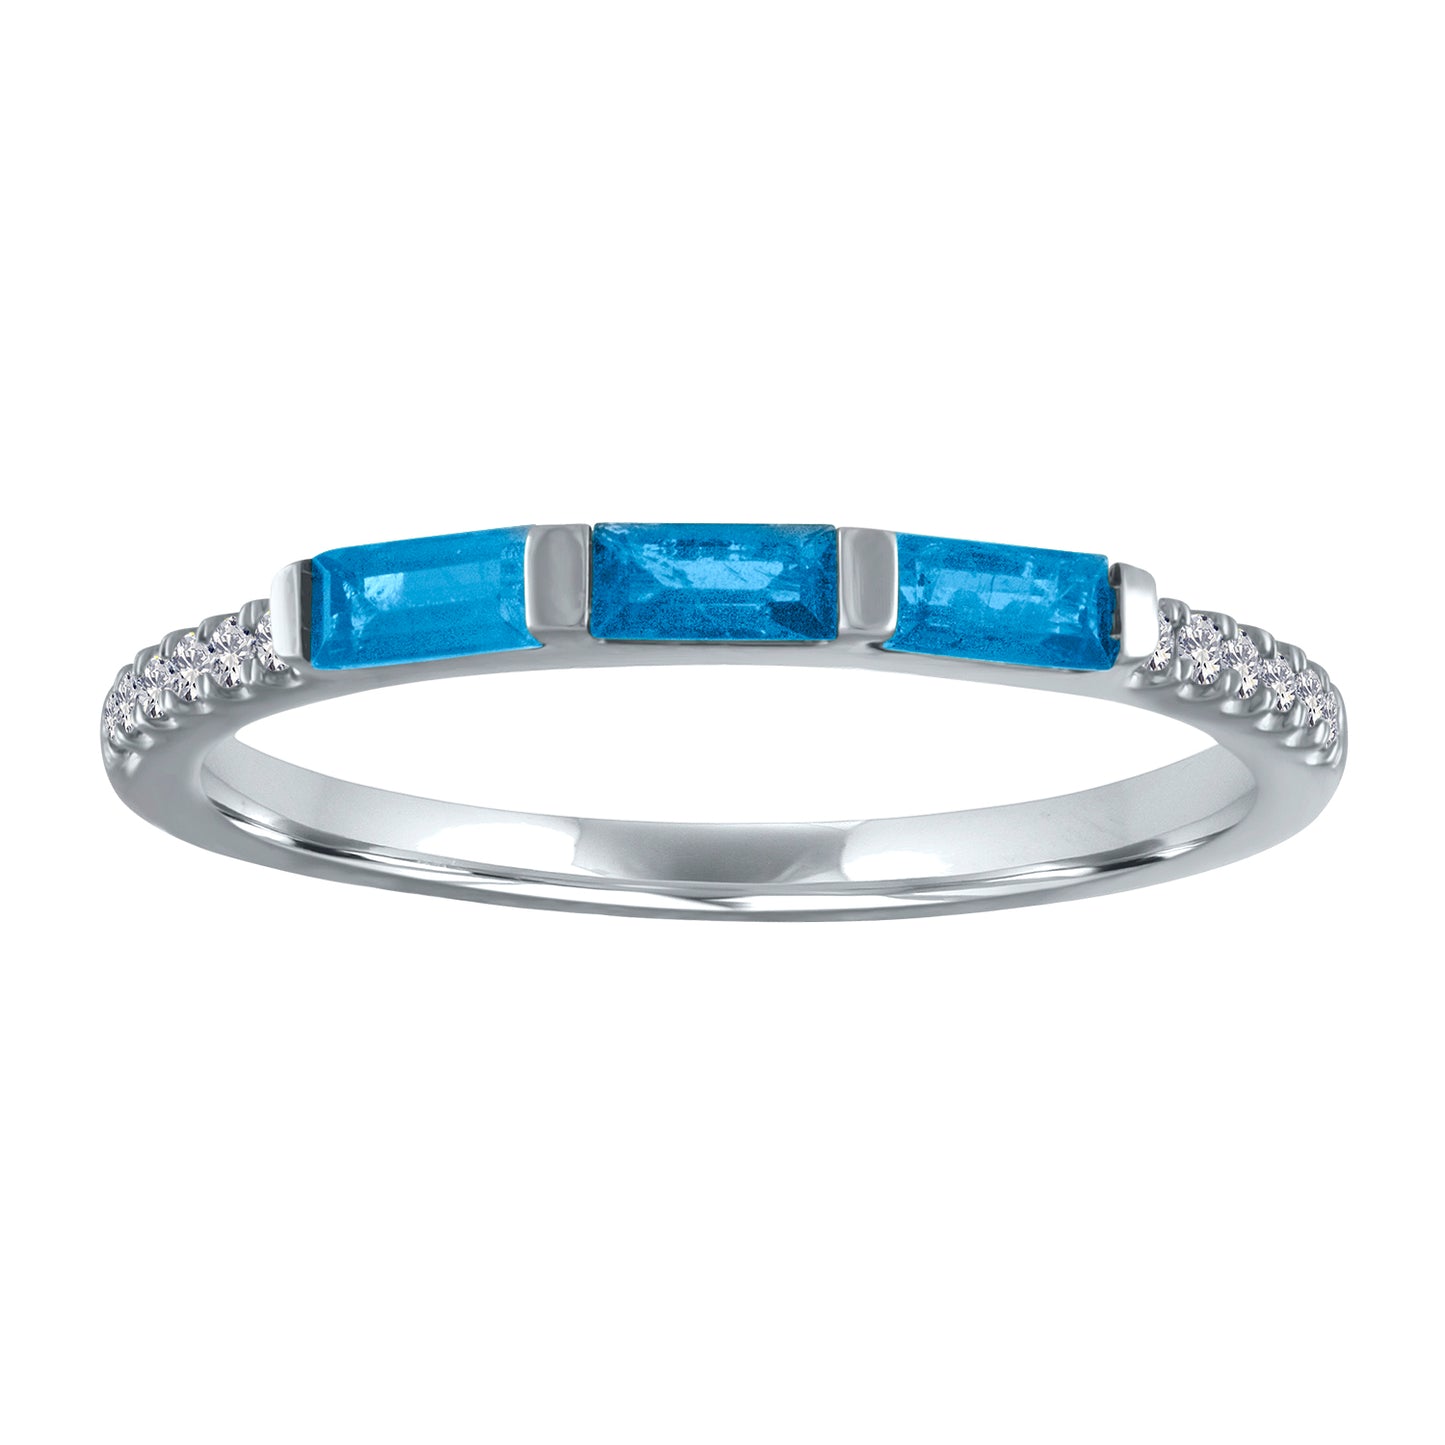 White gold skinny band with three blue topaz baguettes and round diamonds on the shank. 